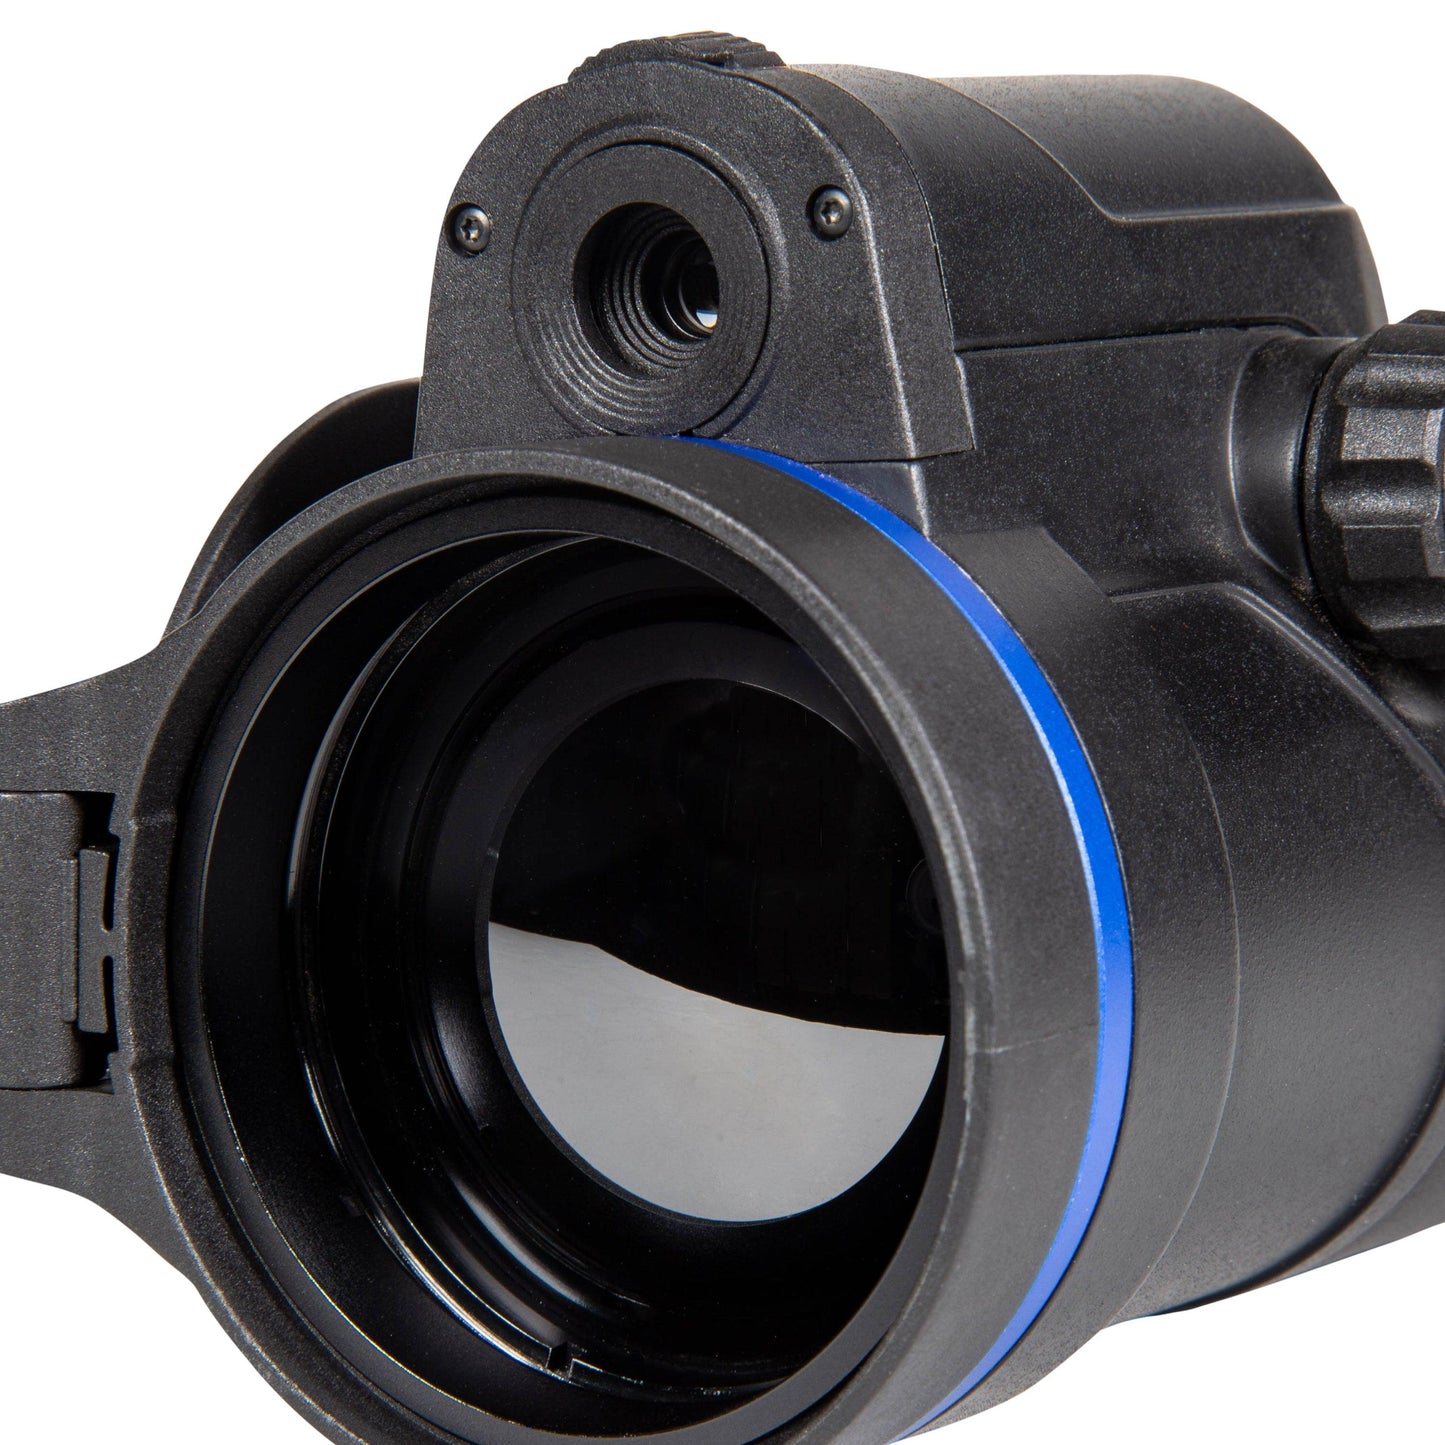 Pulsar Thermion Duo DXP55 Multispectral Thermal Scope - NVU